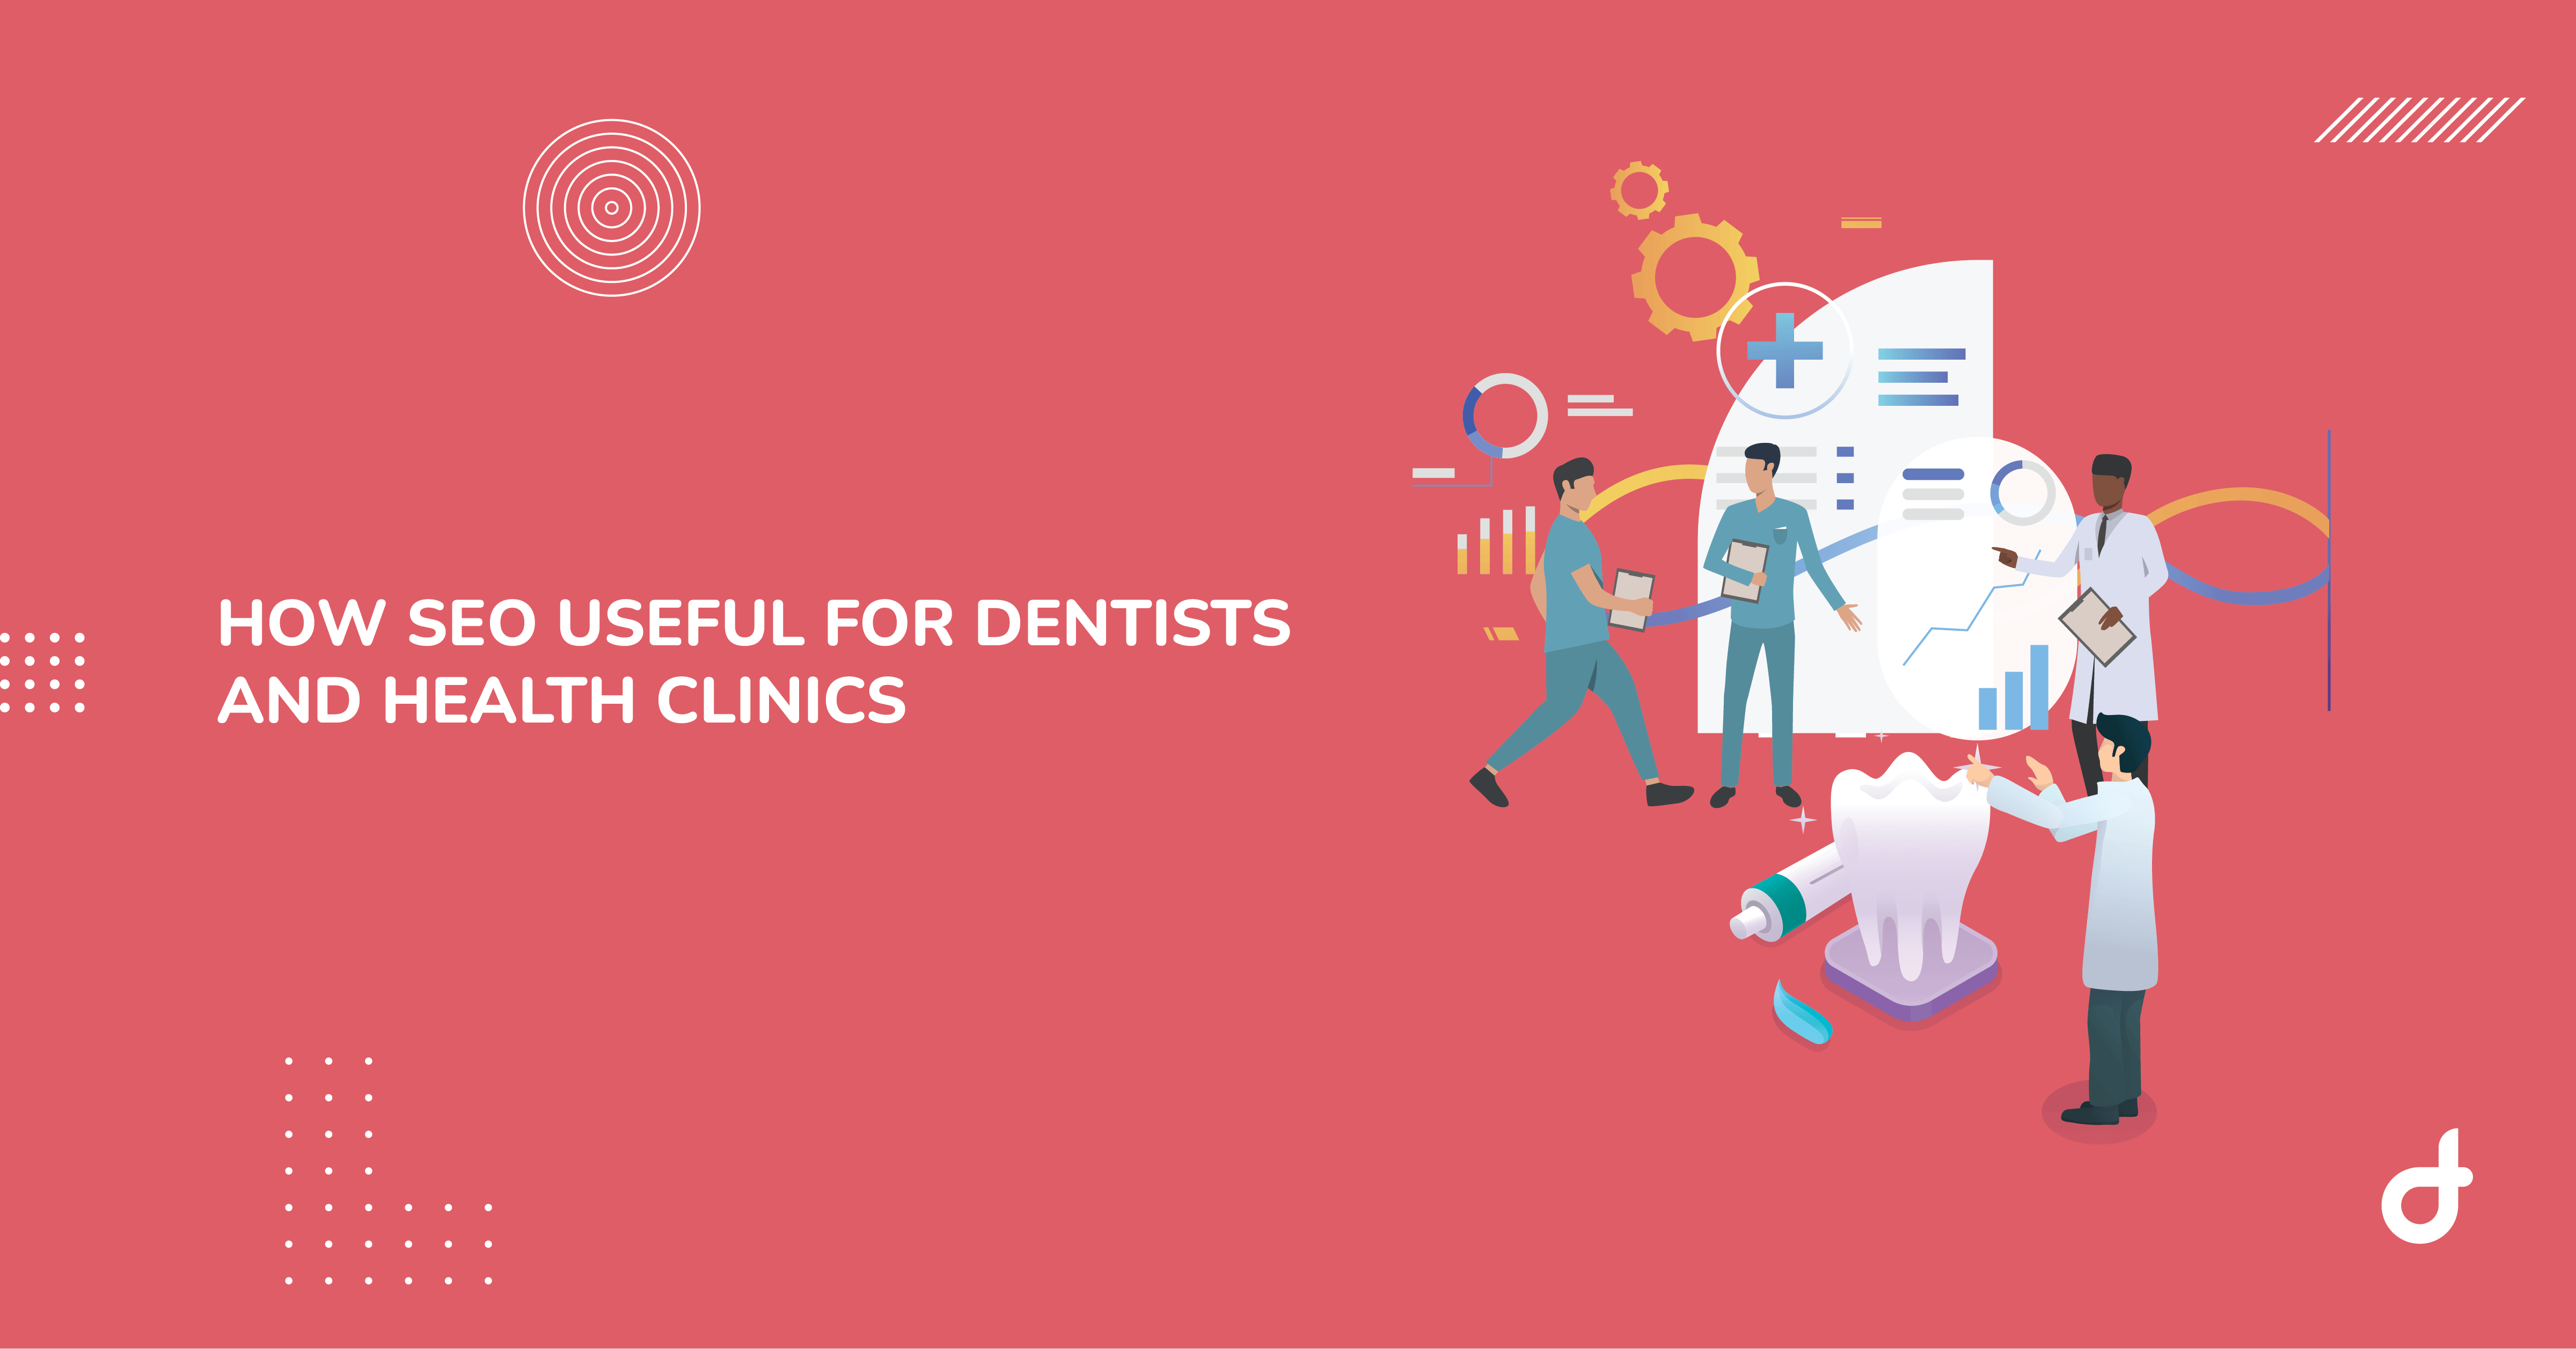 how seo useful for dentists and health clinics?